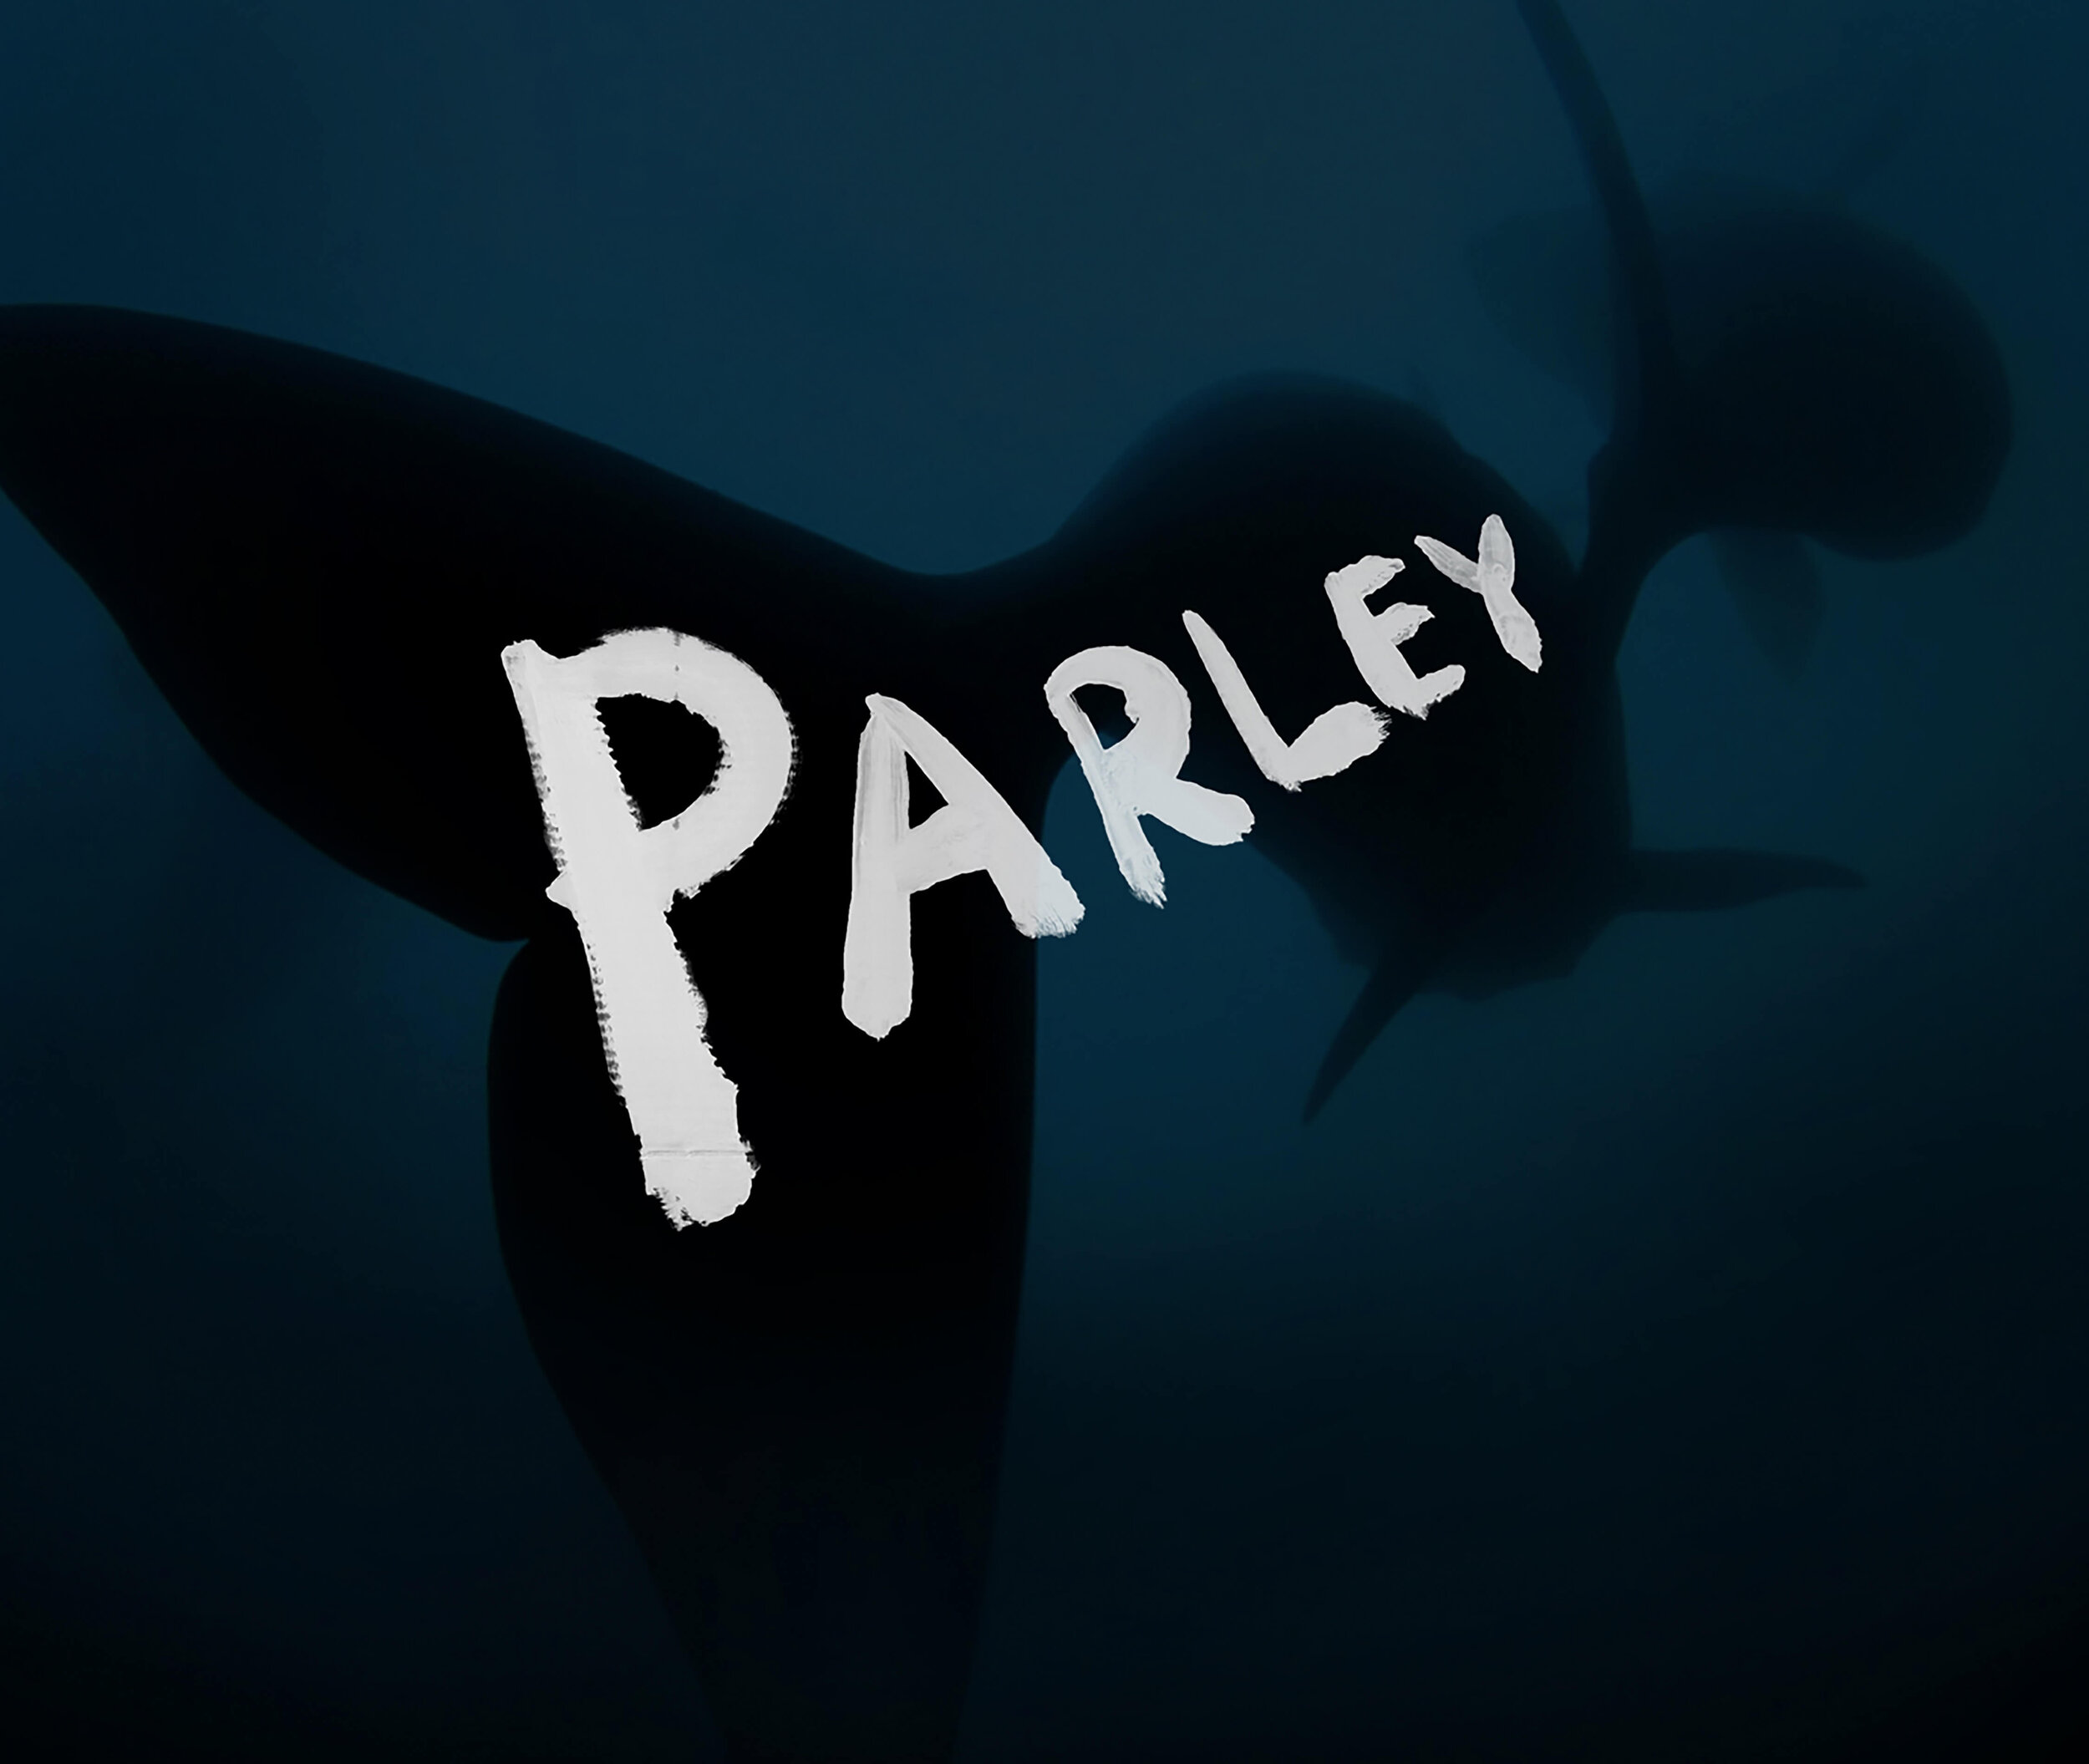 Parley meaning